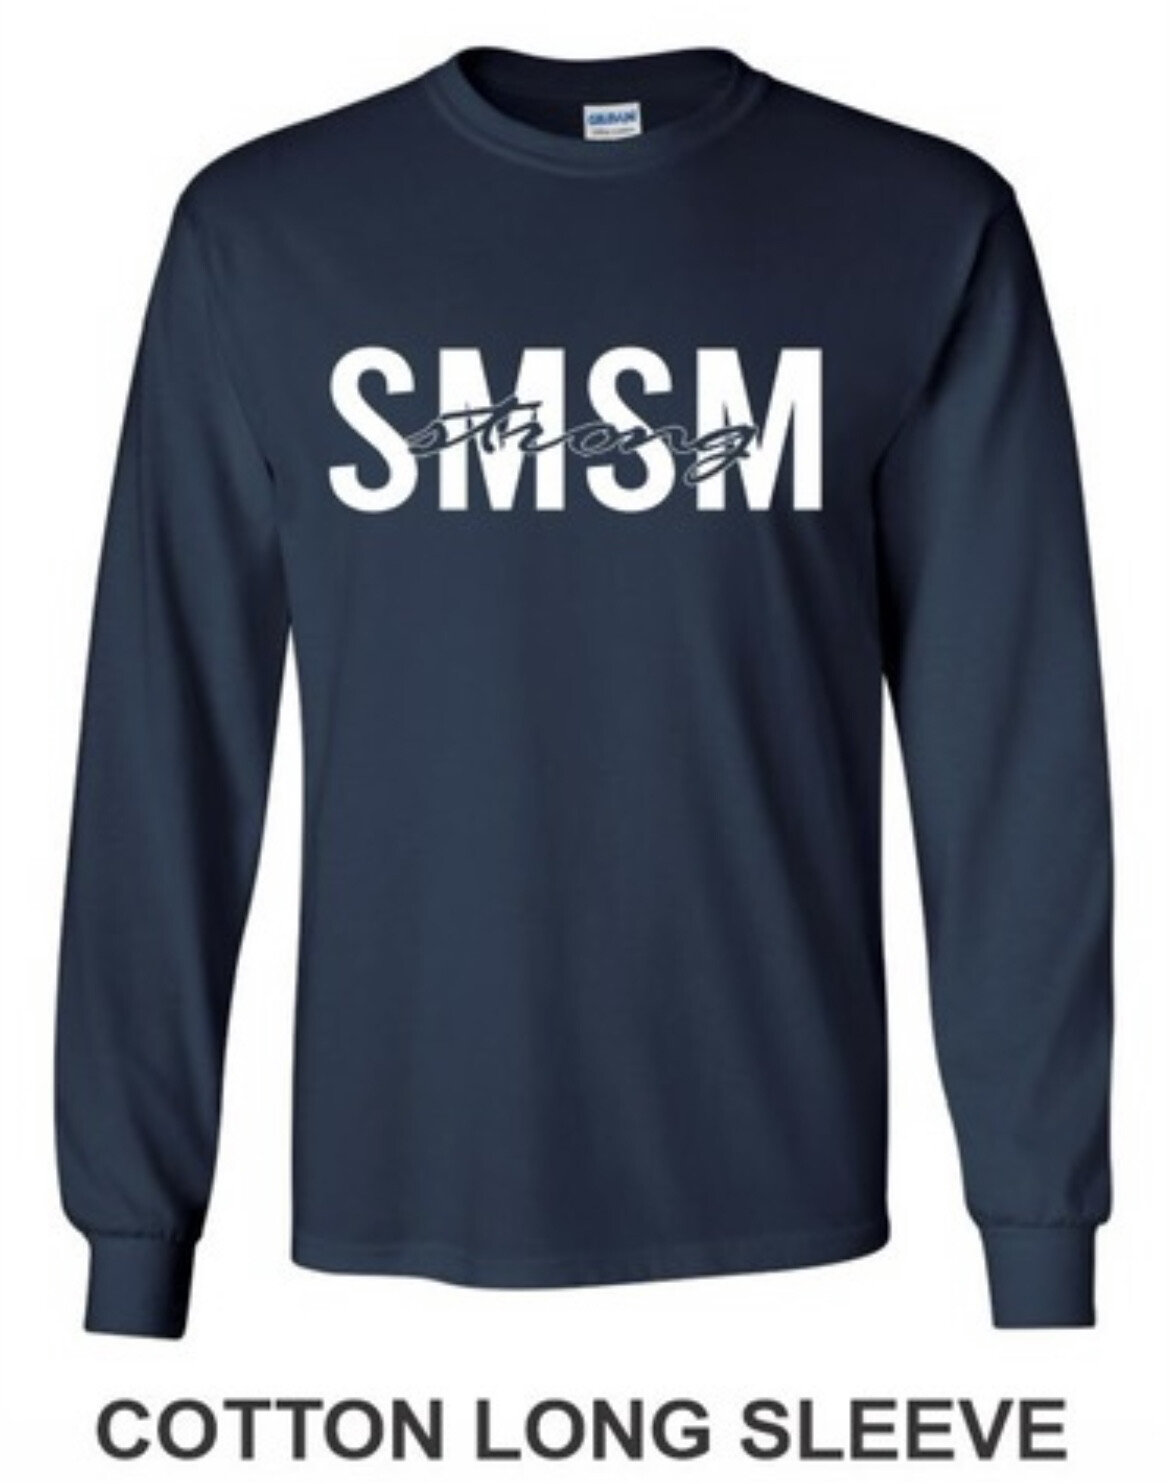 SMSM Strong Long Sleeve Shirt